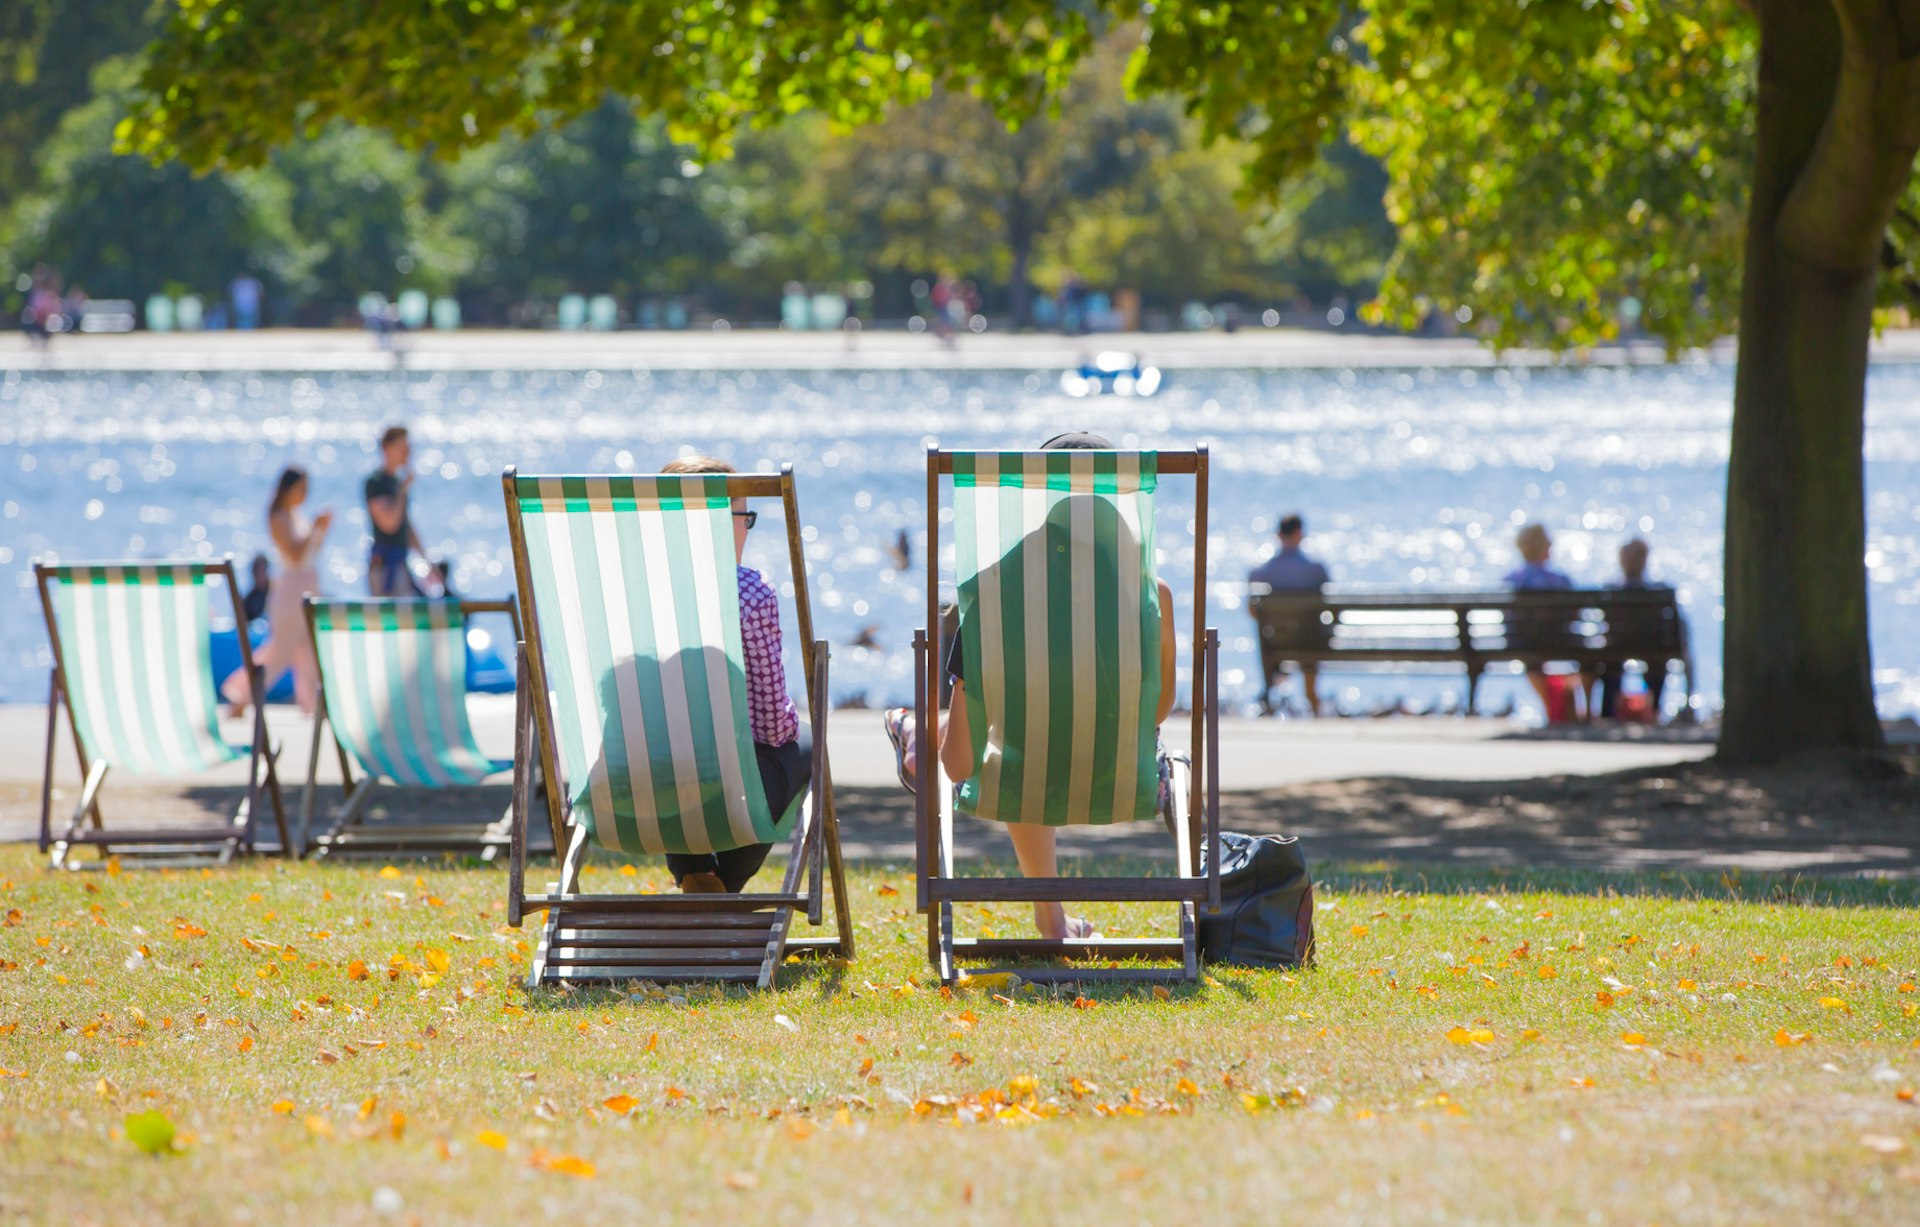 Figures sat in white-and-green striped deck chairs facing a lake that's sparkling in the sun